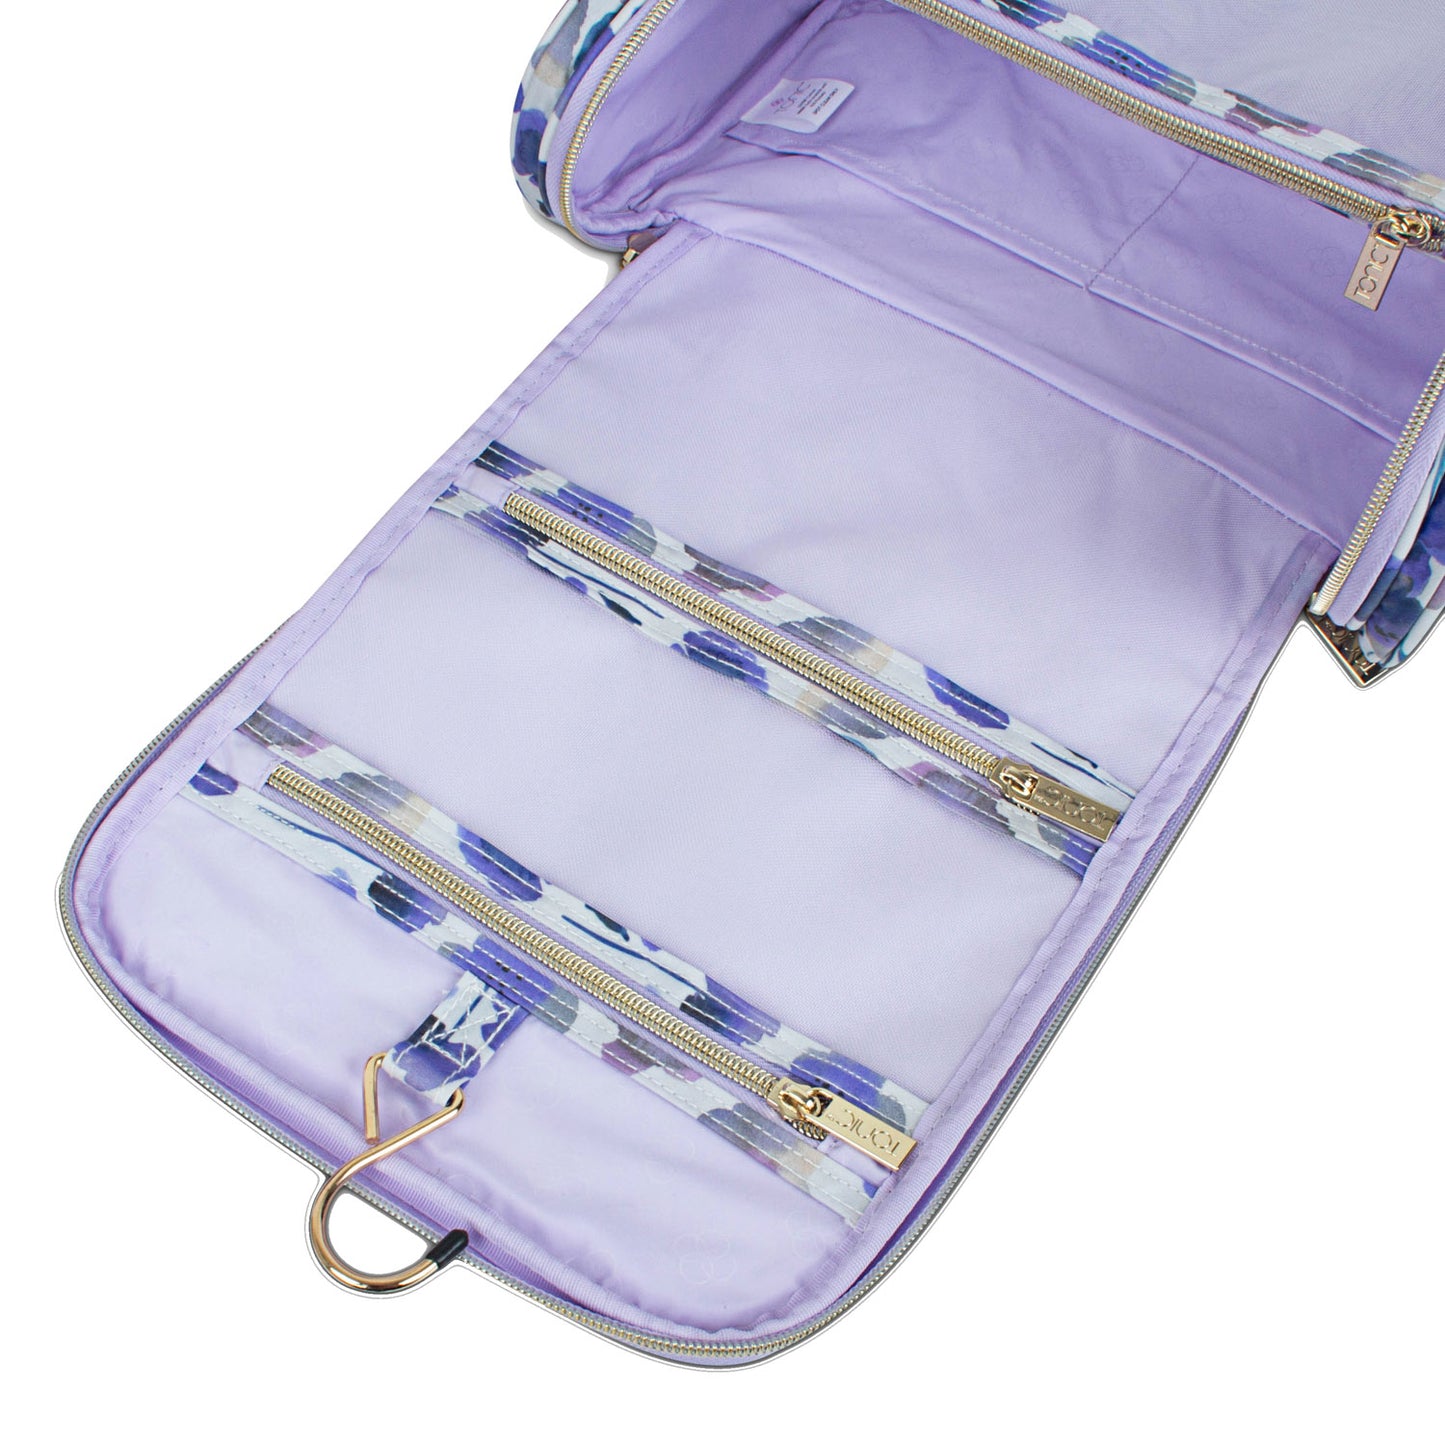 Essential Hanging Cosmetic Bag Morning Meadow